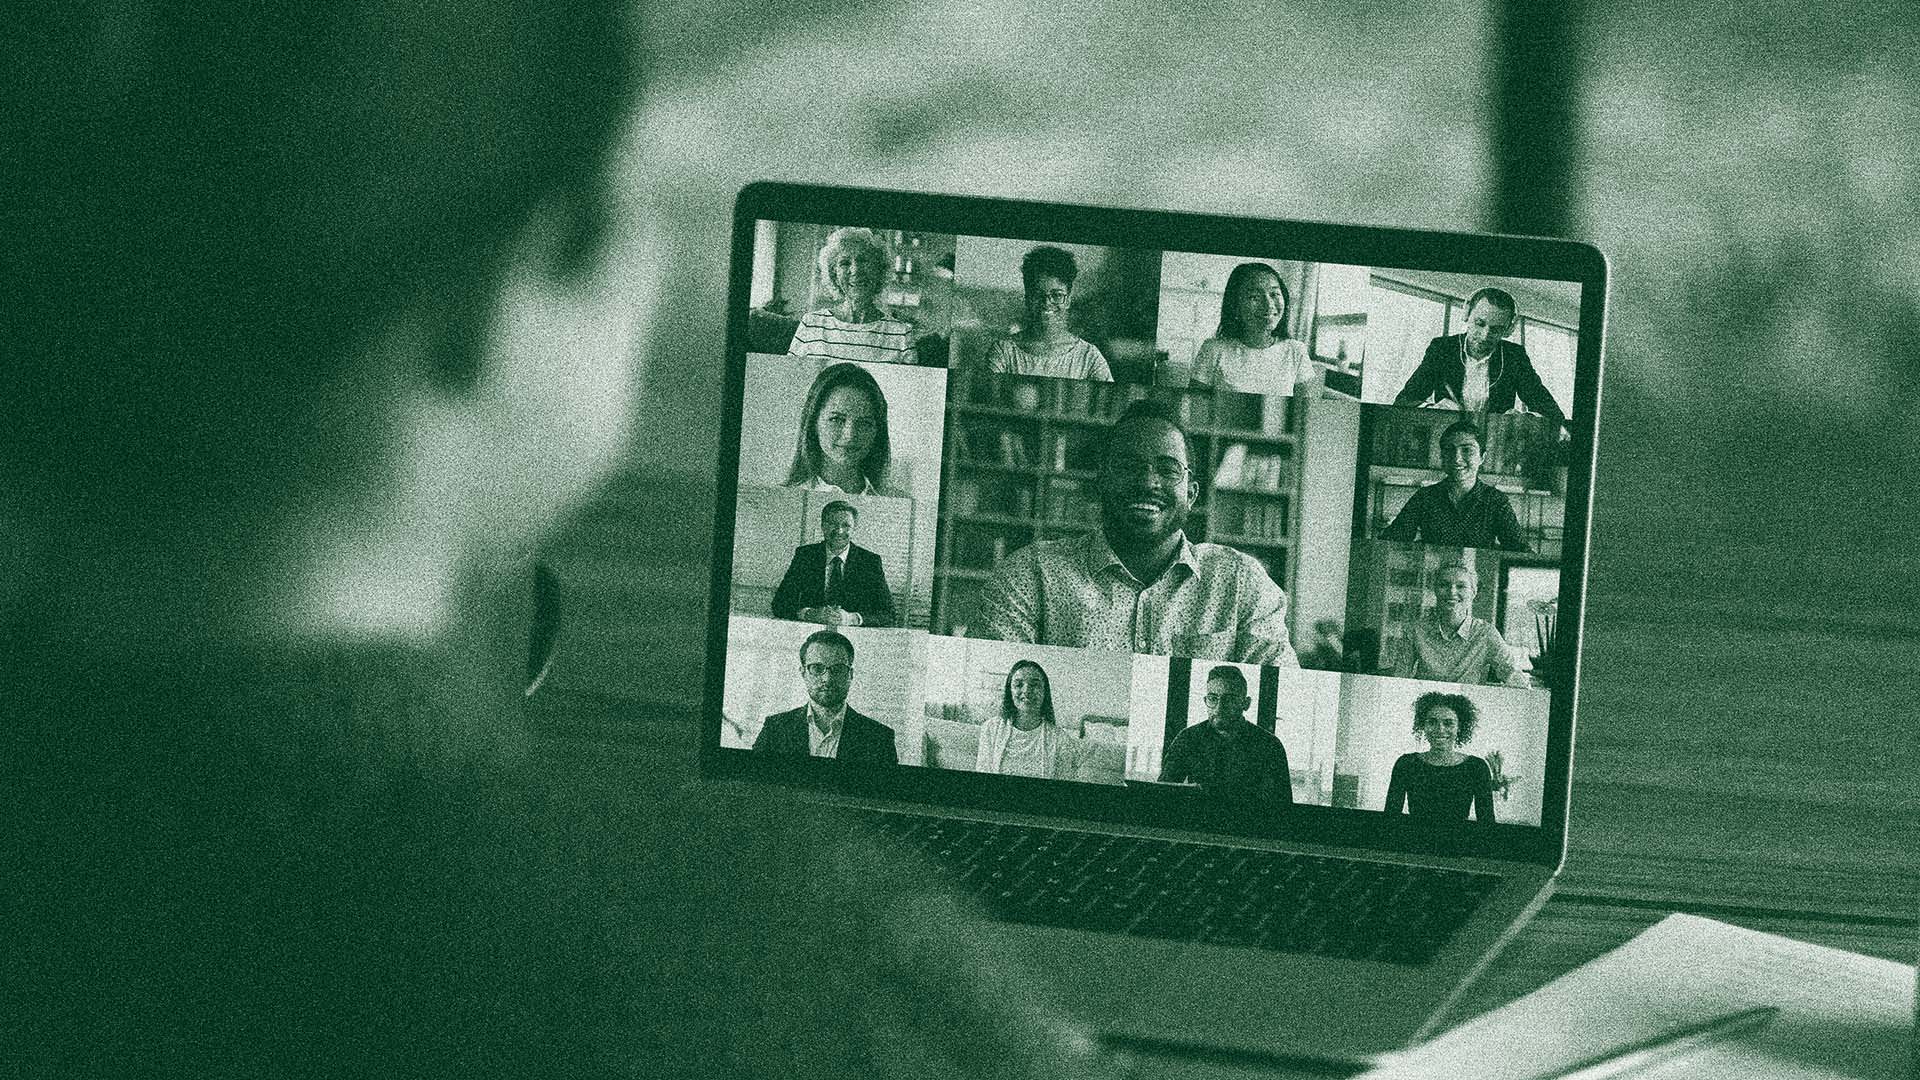 How to Make Virtual Meetings More Productive Than In-Person